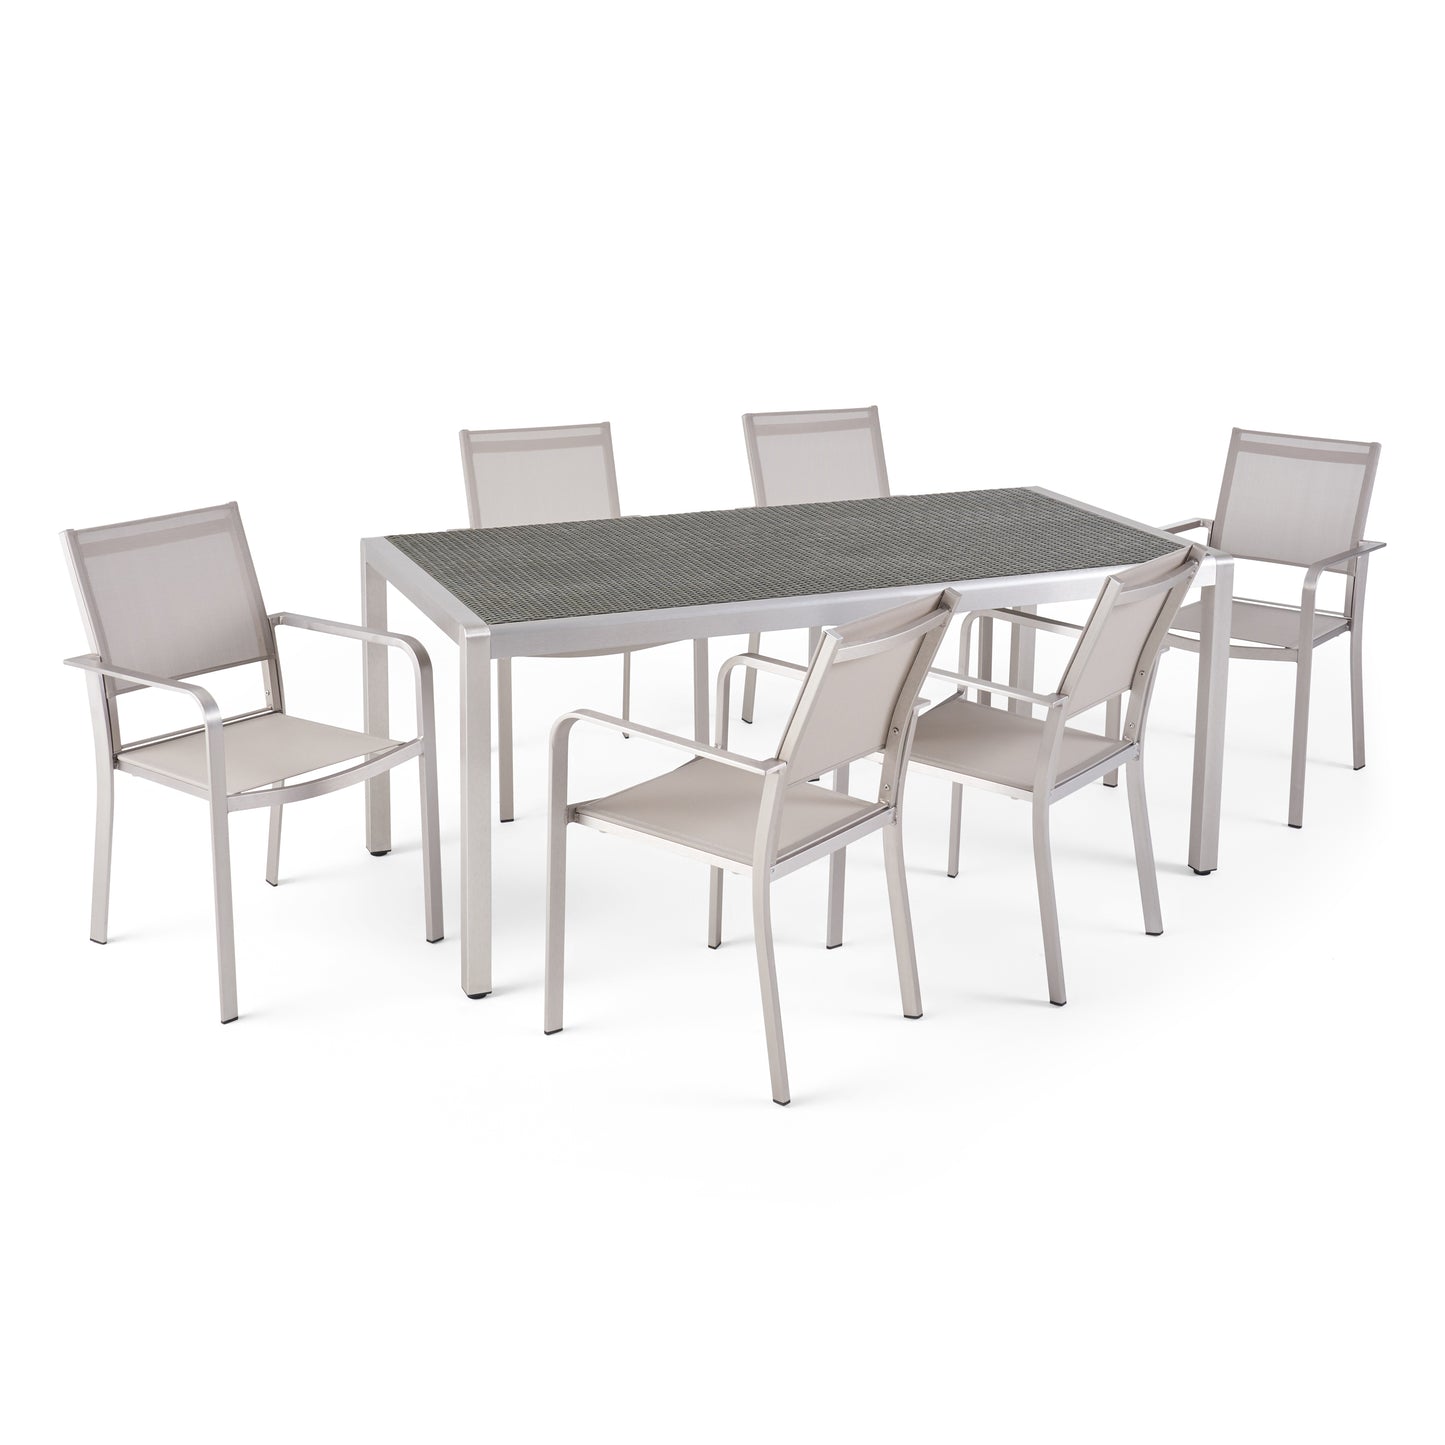 Thali Outdoor Modern 6 Seater Aluminum Dining Set with Wicker Table Top